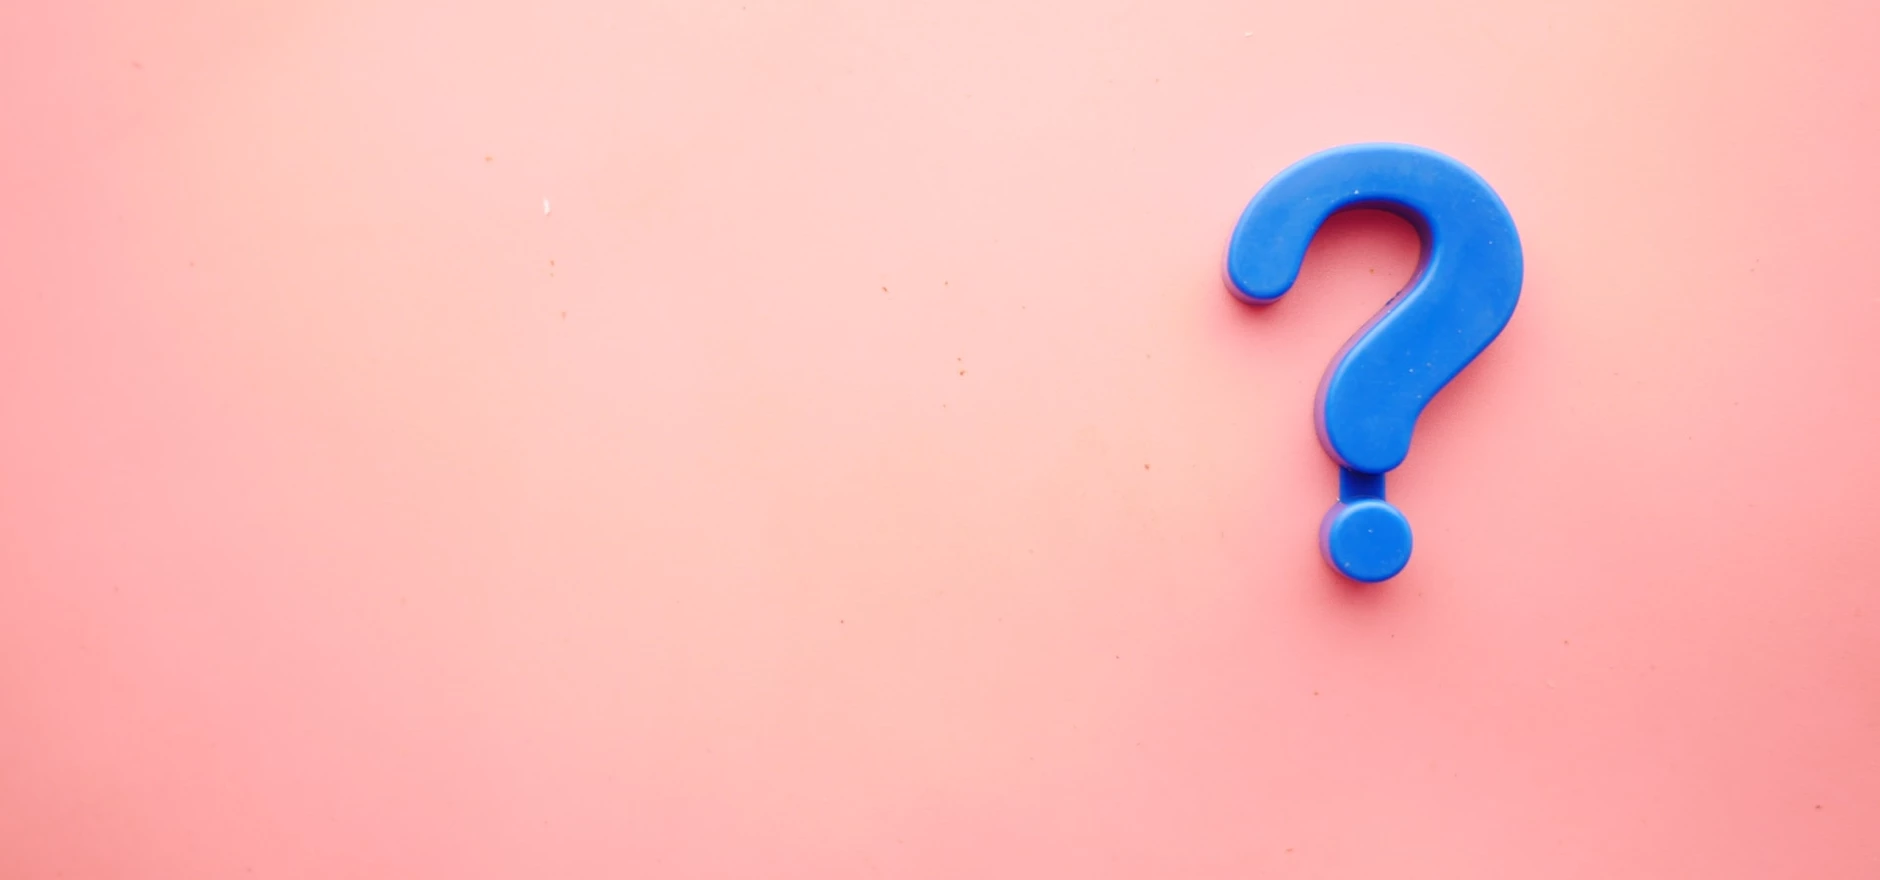 Blue plastic question mark on a pink background